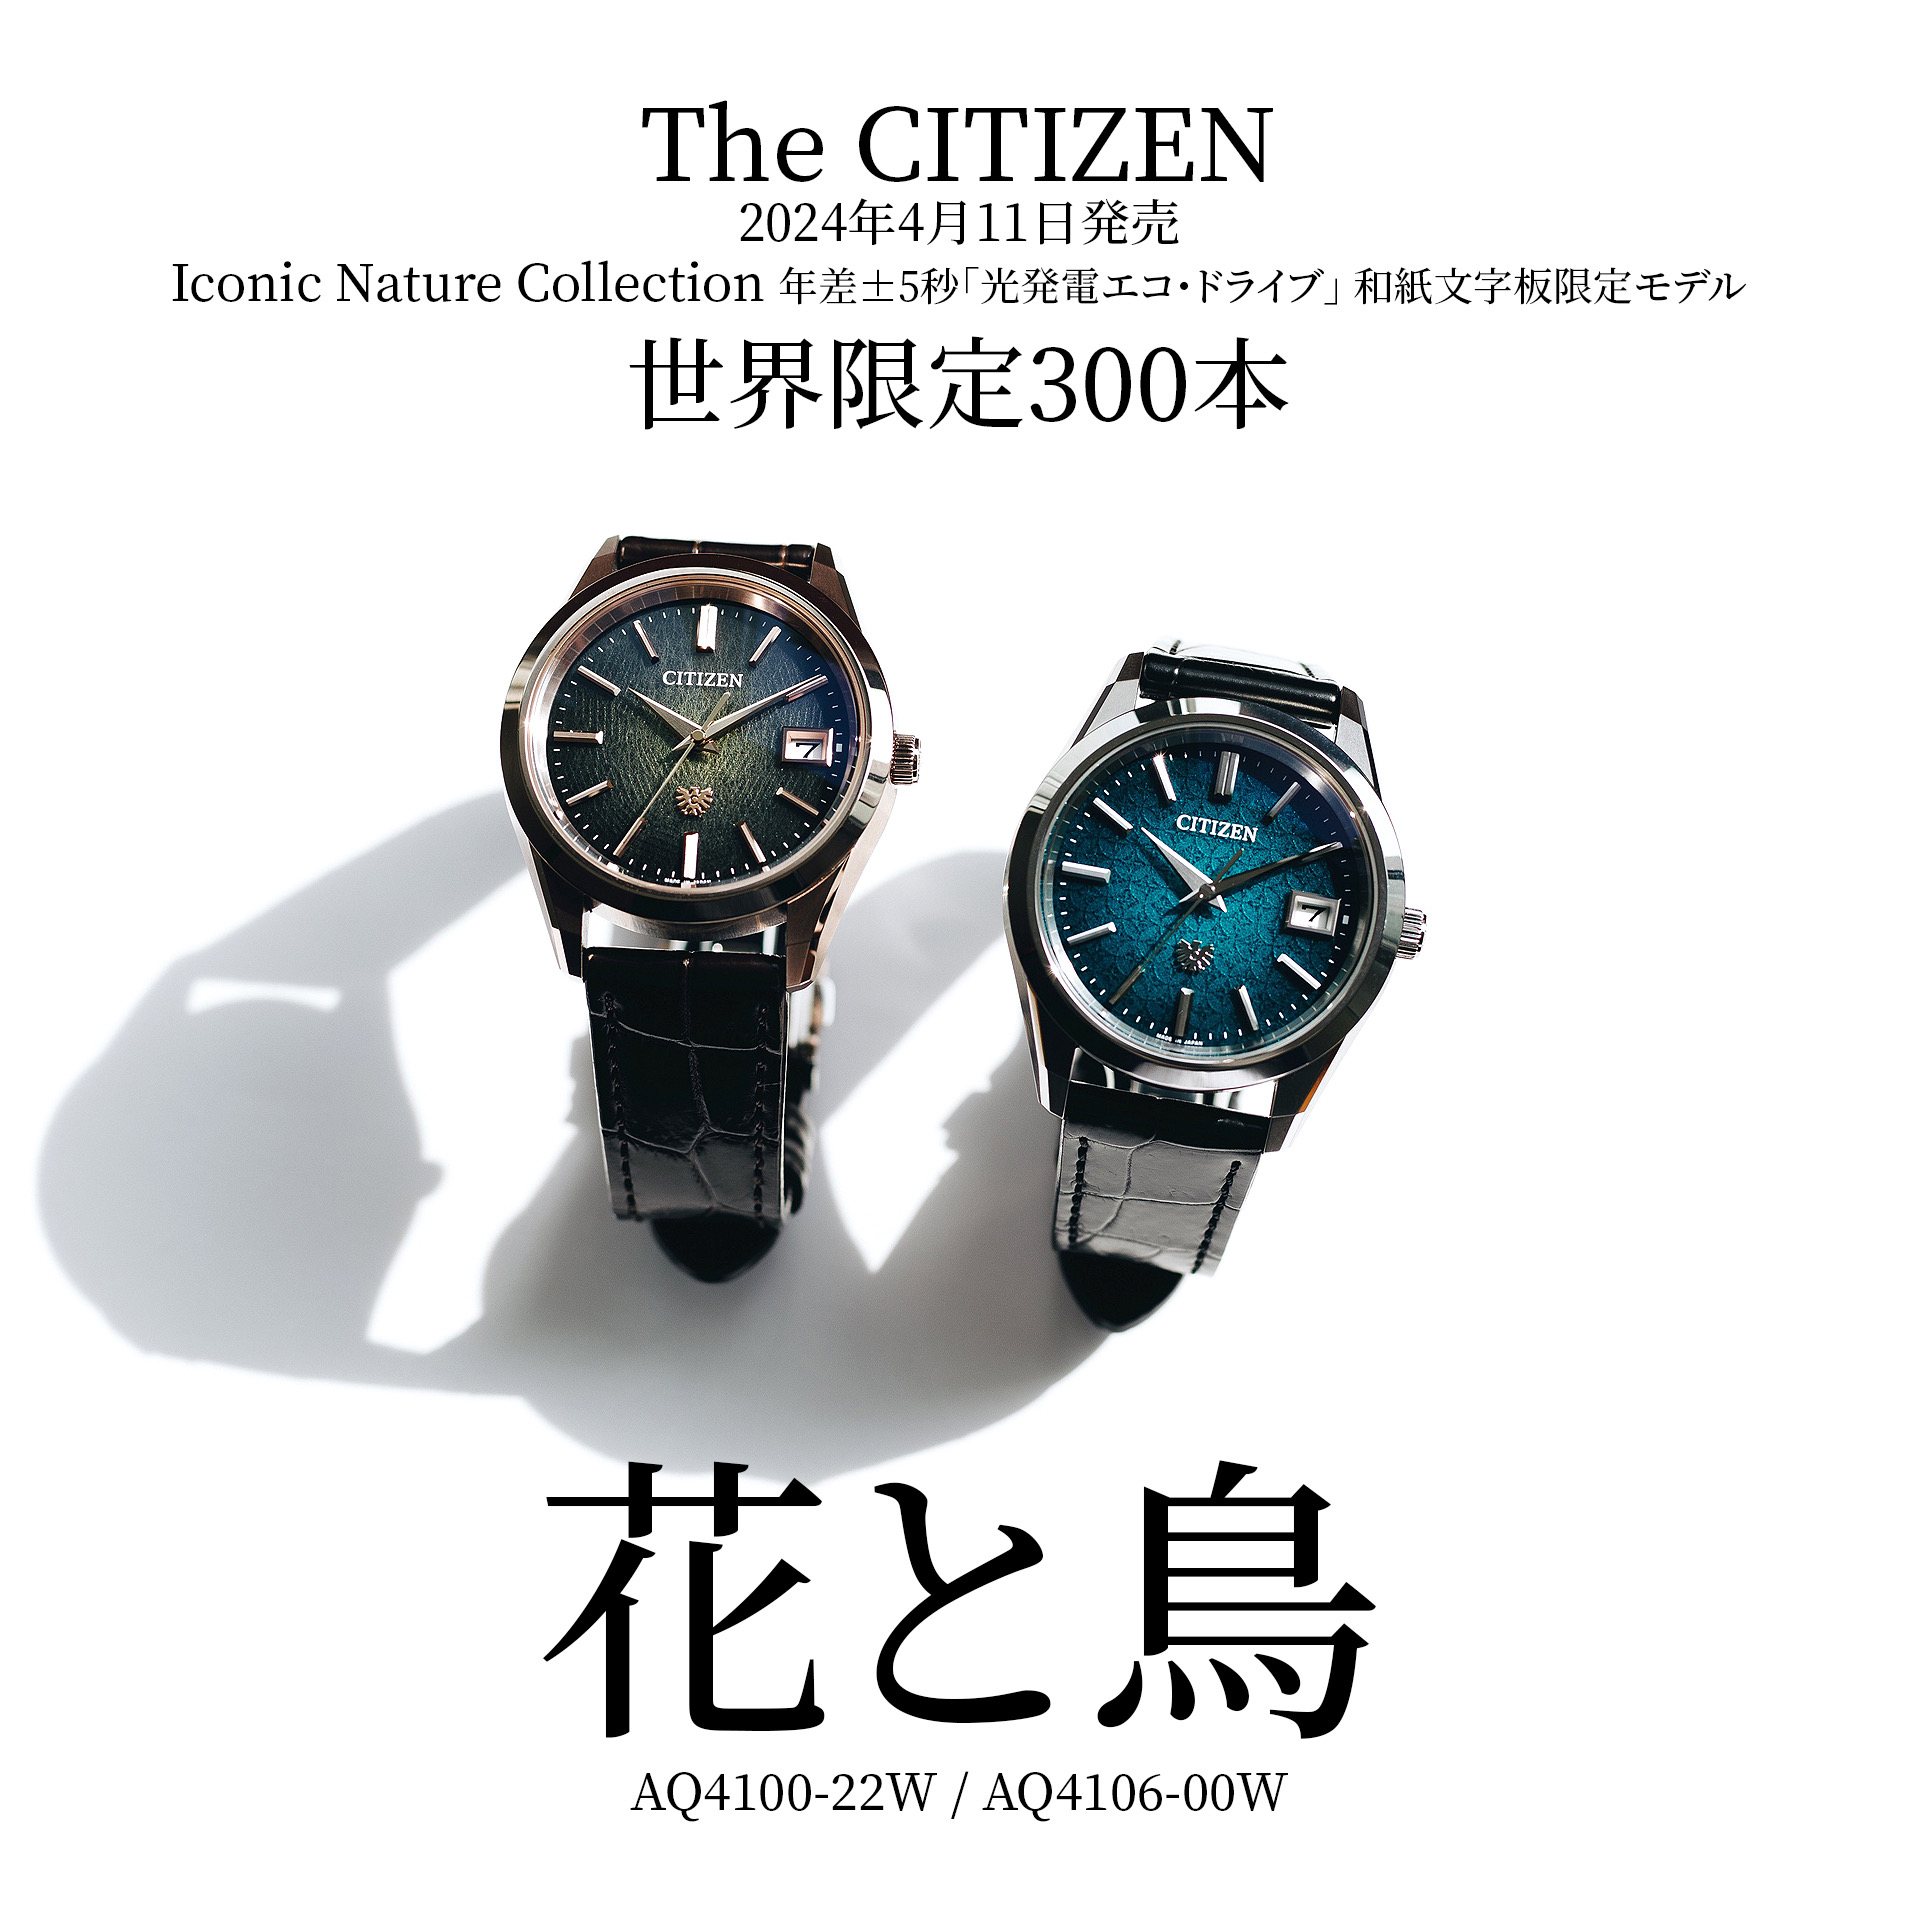 The CITIZEN 和紙文字板限定モデル Iconic Nature Collection 【THREEC CHANNEL 229回】